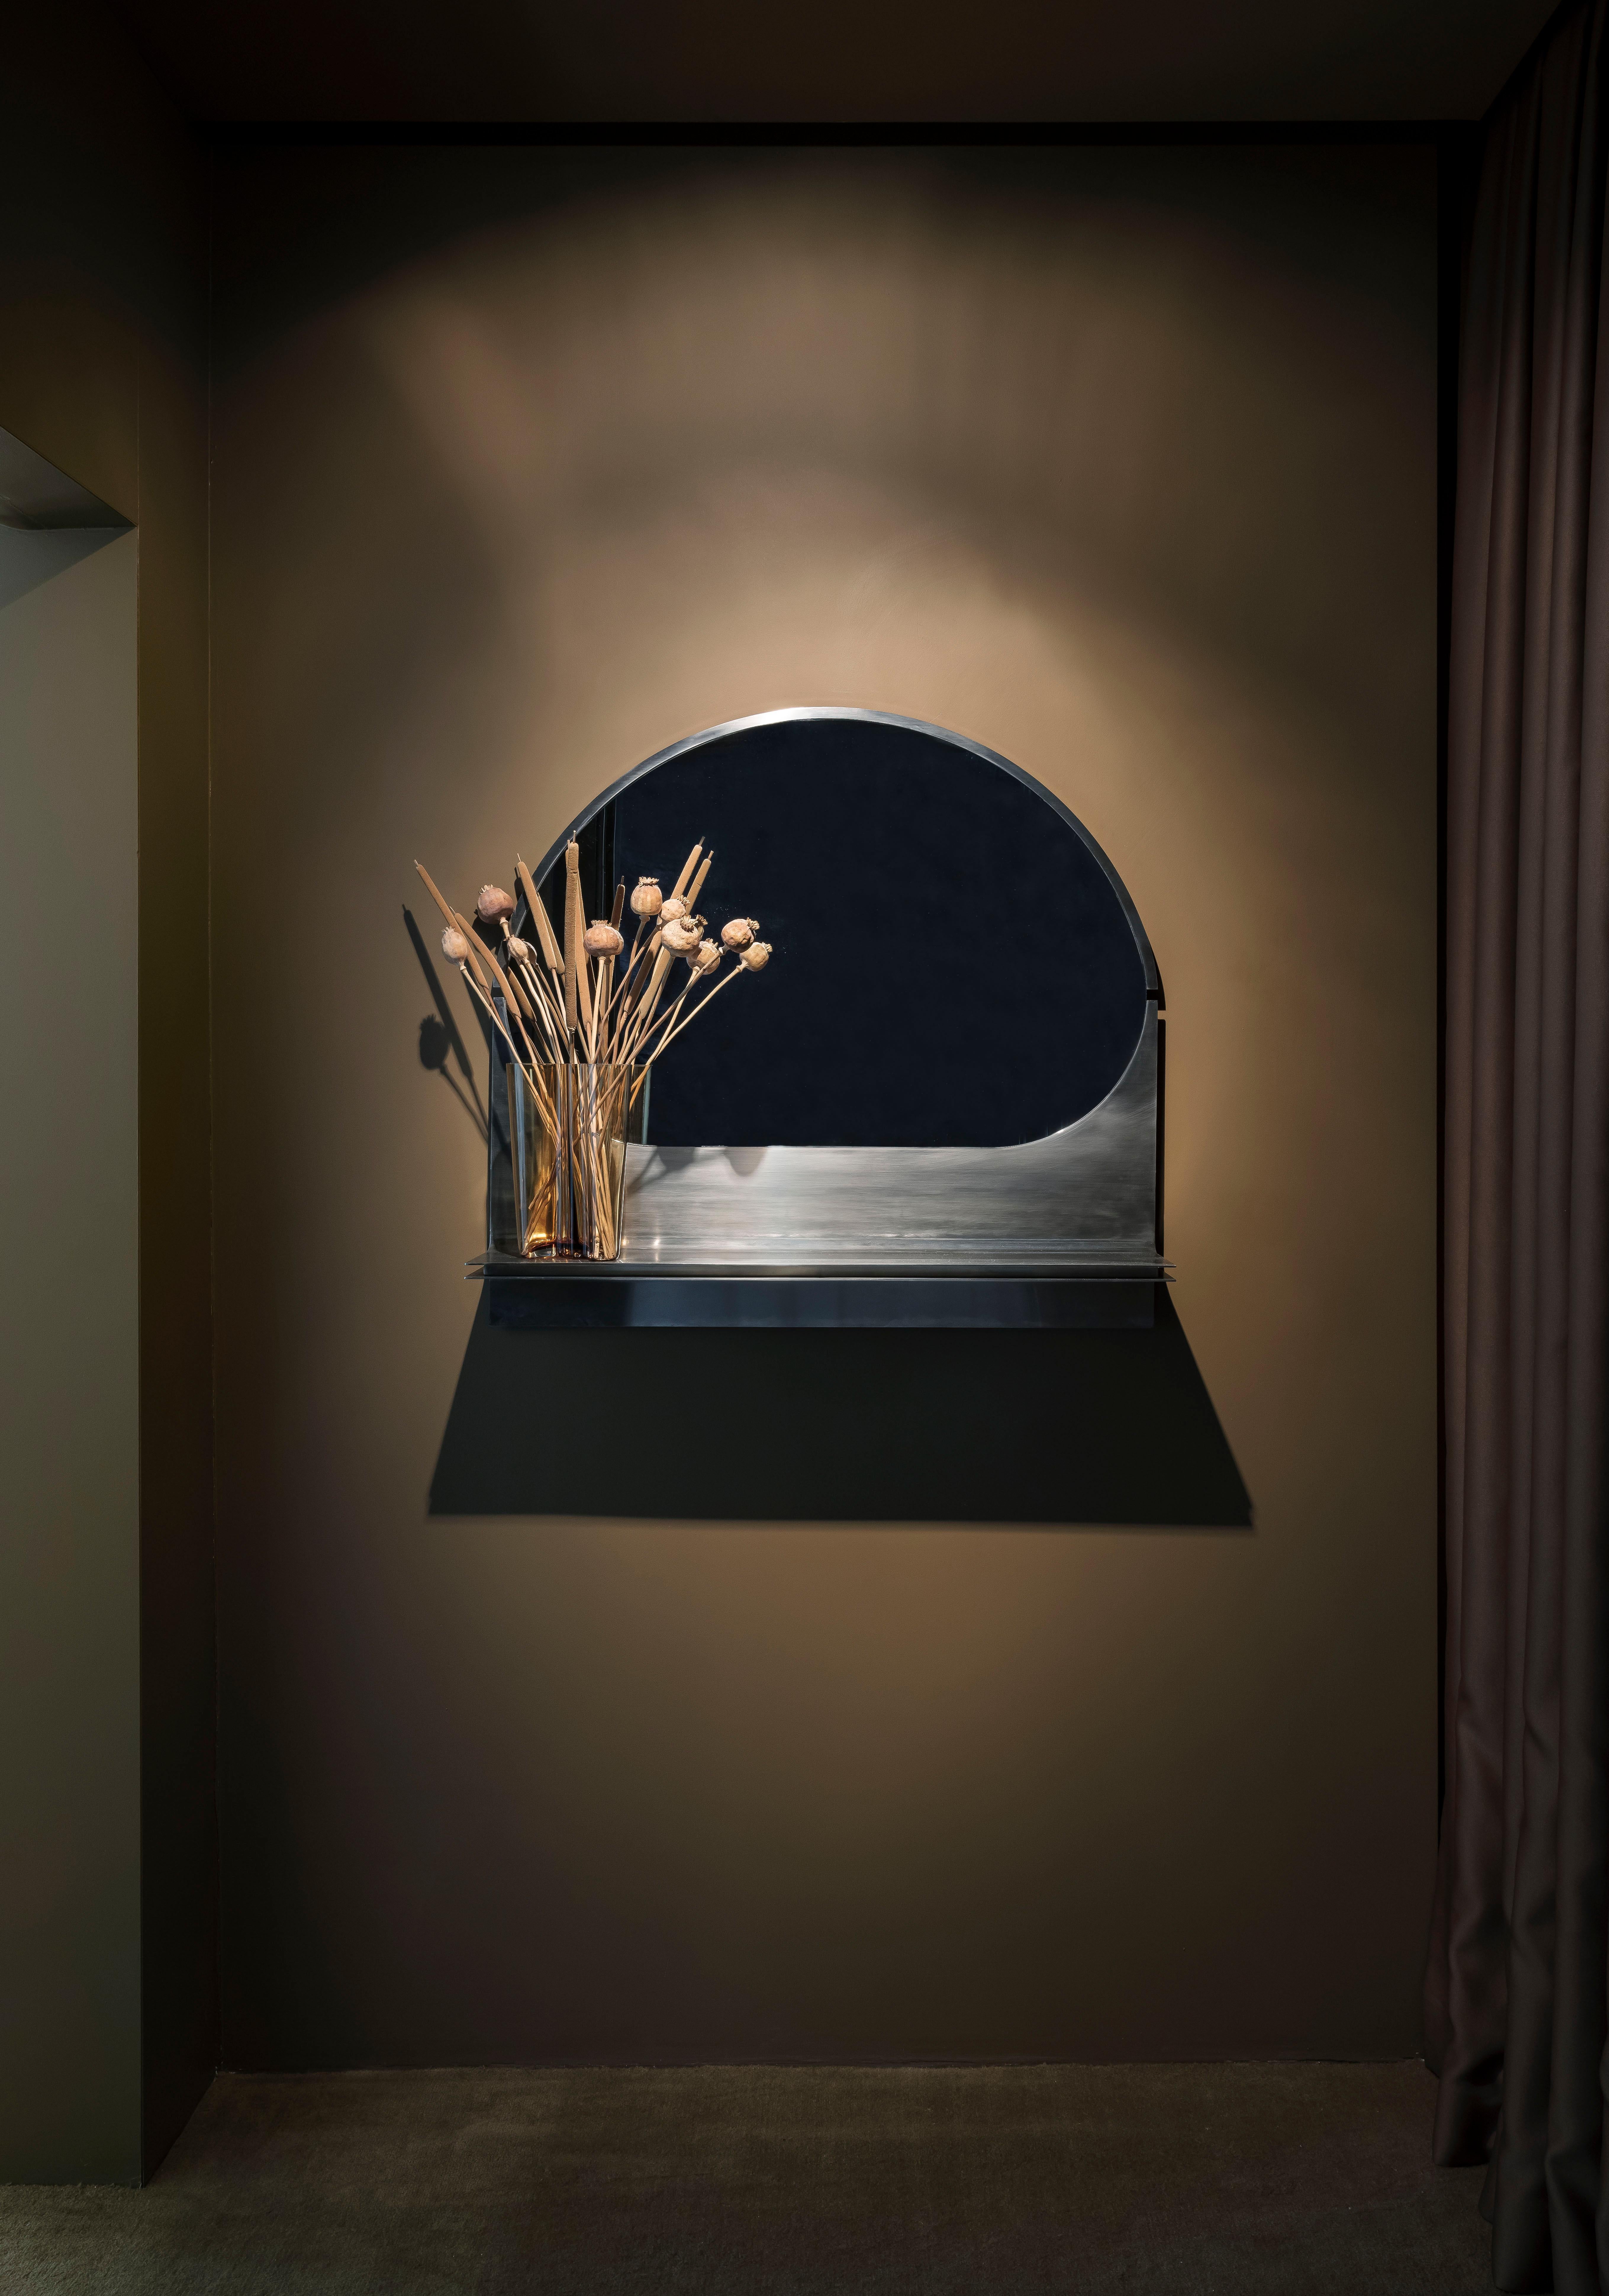 Bend mirror with shelf by Buket Hoscan Bazman
2019
Dimensions: W 90, D 17, H 85 cm
Material: Stainless steel and mirror

Buket Hoscan Bazman was born in Izmir, Turkey, in 1989. Graduated at the Isik University and after few years of working in the